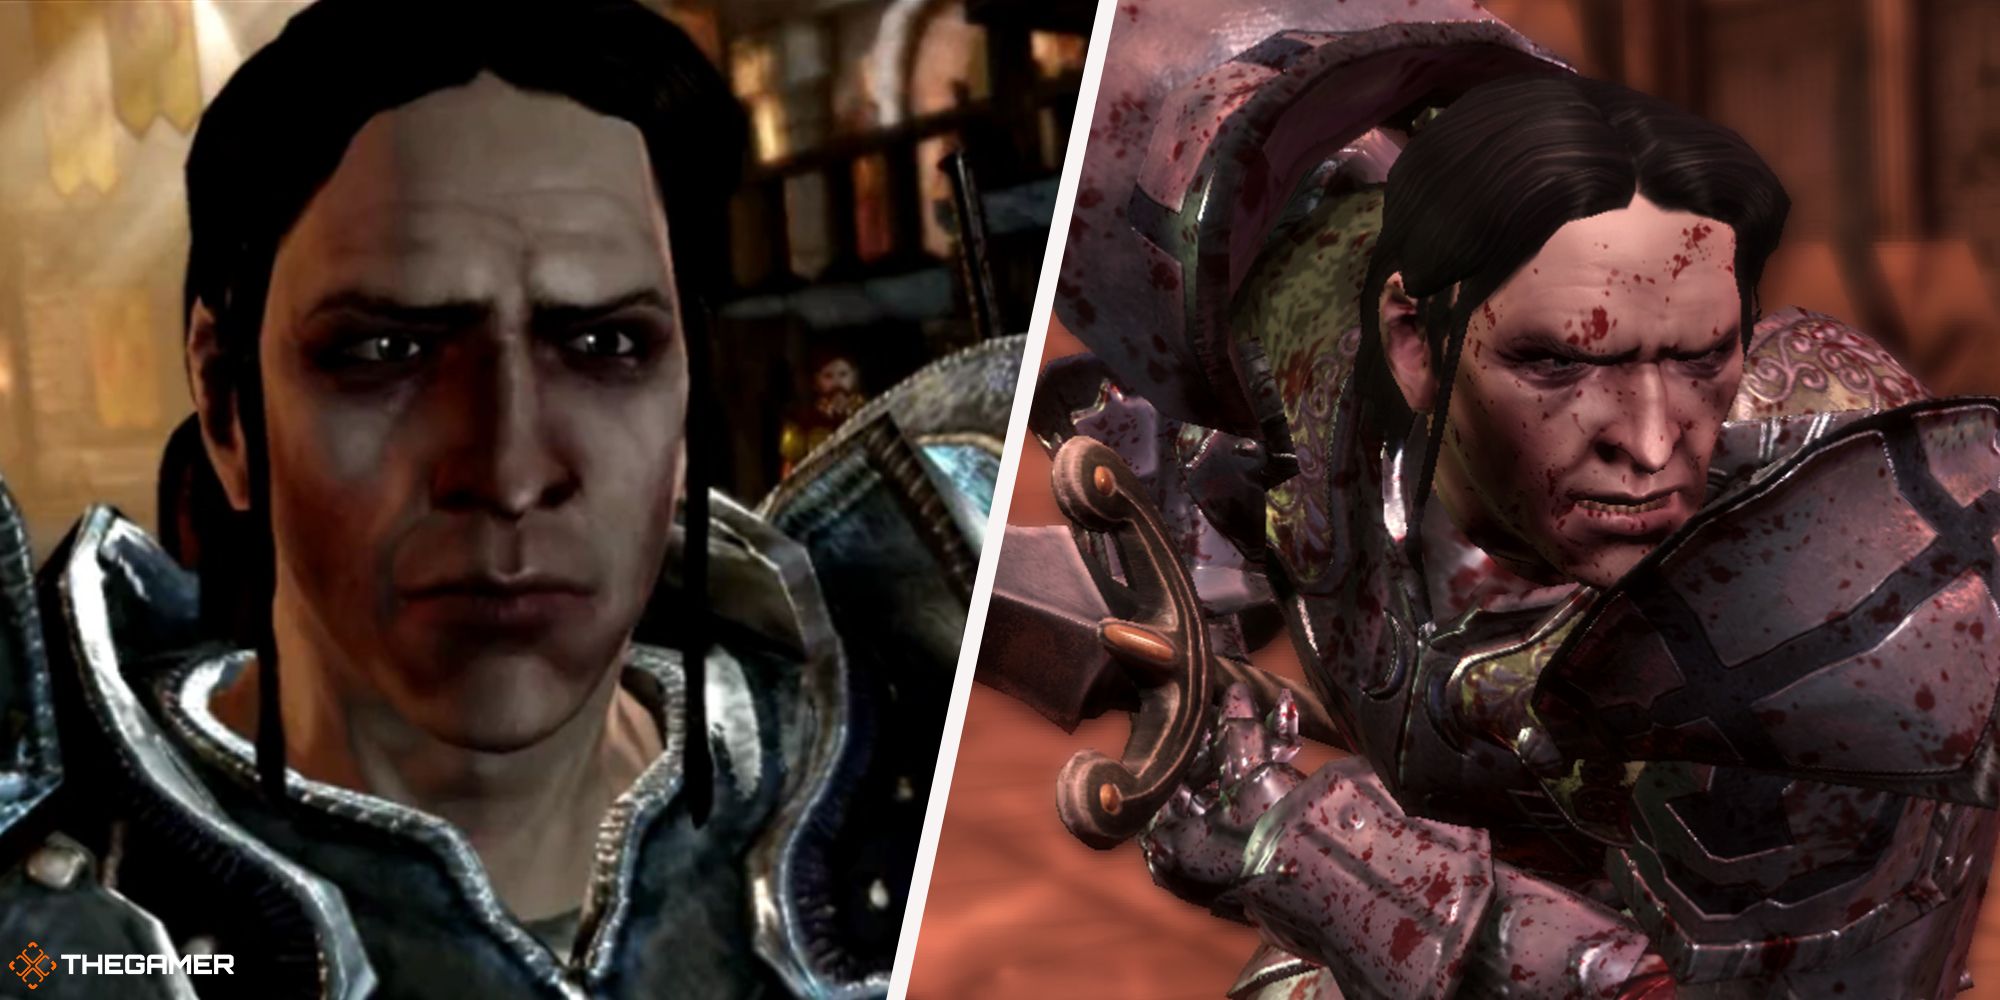 Radiator Blog: Dragon Age: Origins is the First Game About Gay Marriage +  The Power of Mods